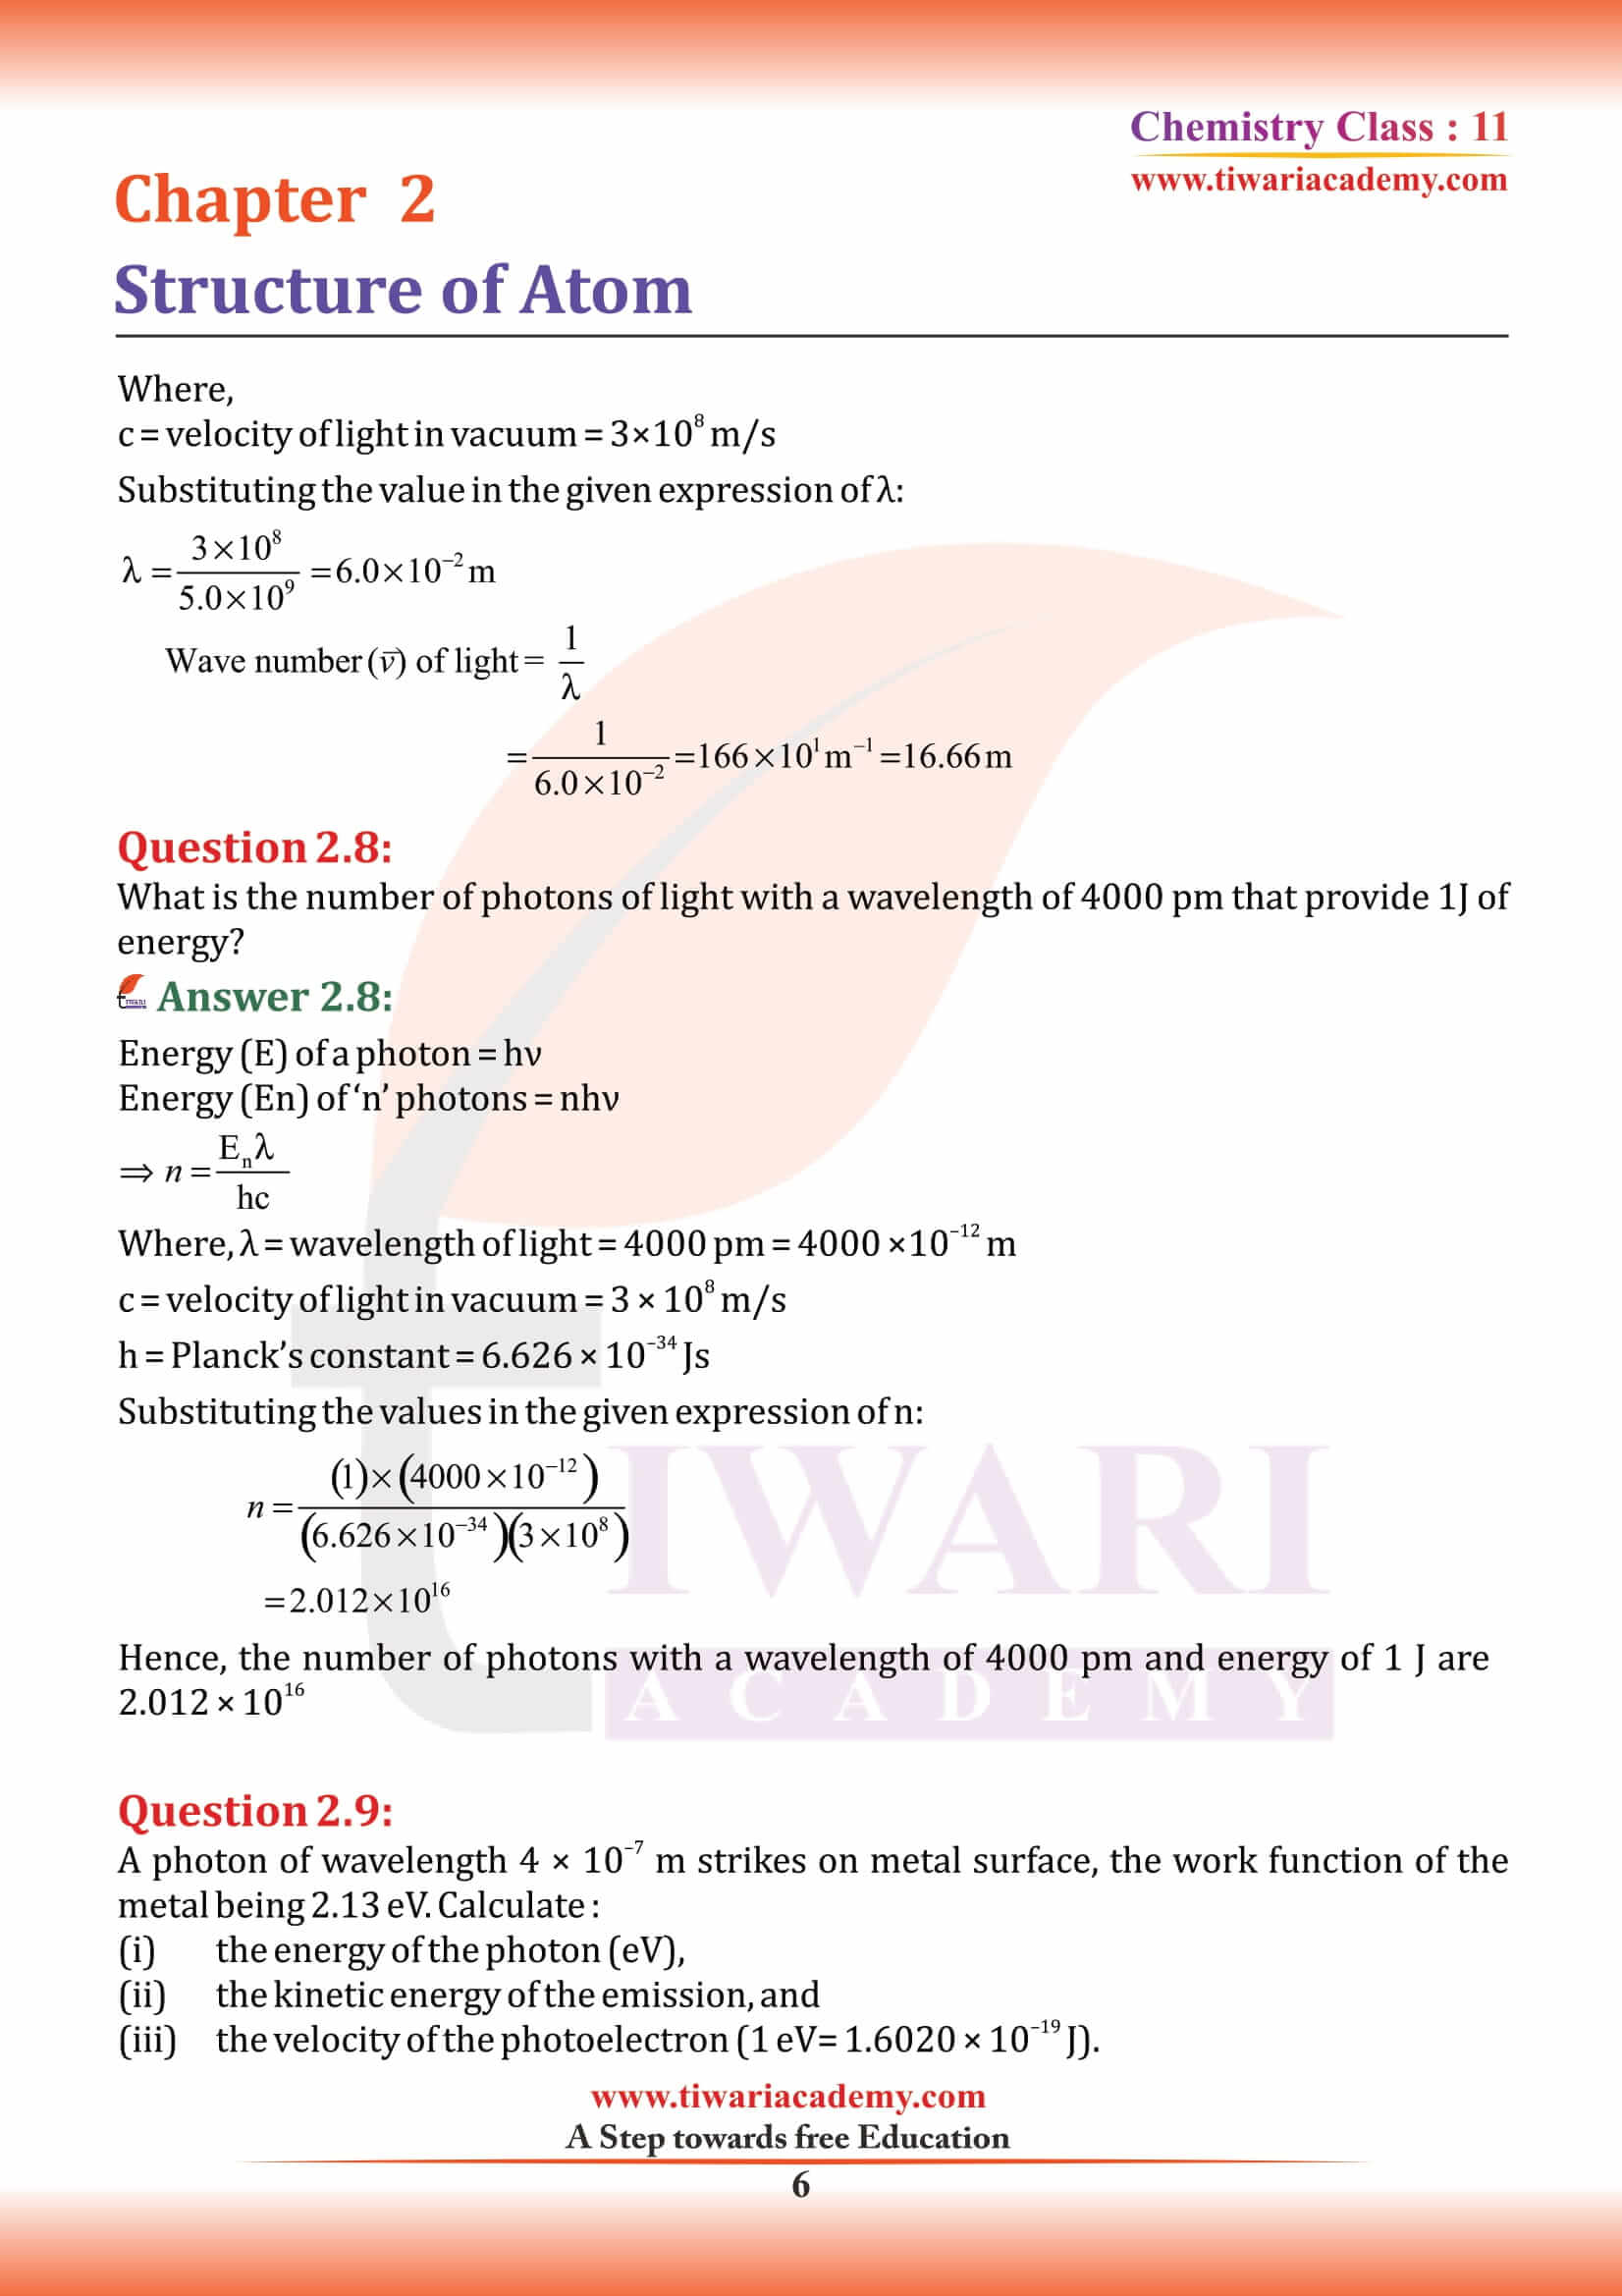 NCERT Solutions for Class 11 Chemistry Chapter 2 questions 1 2 3 4 5